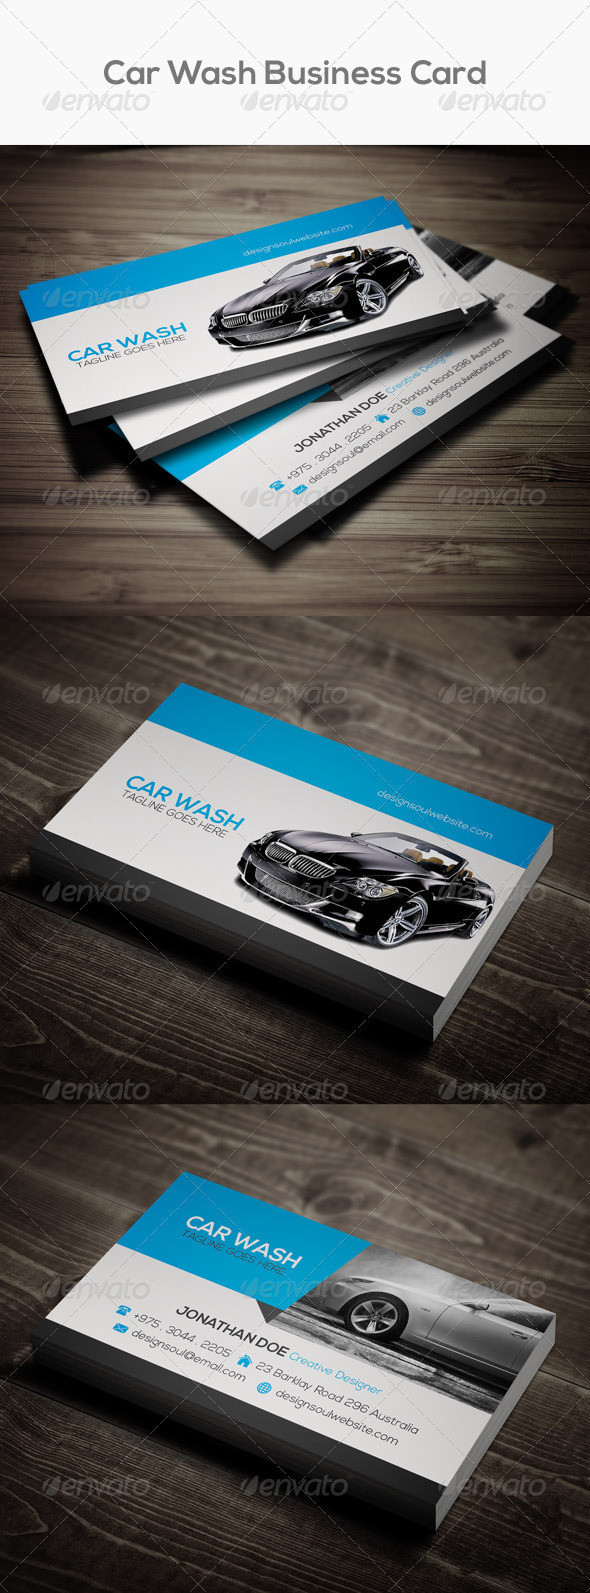 Car wash business card preview